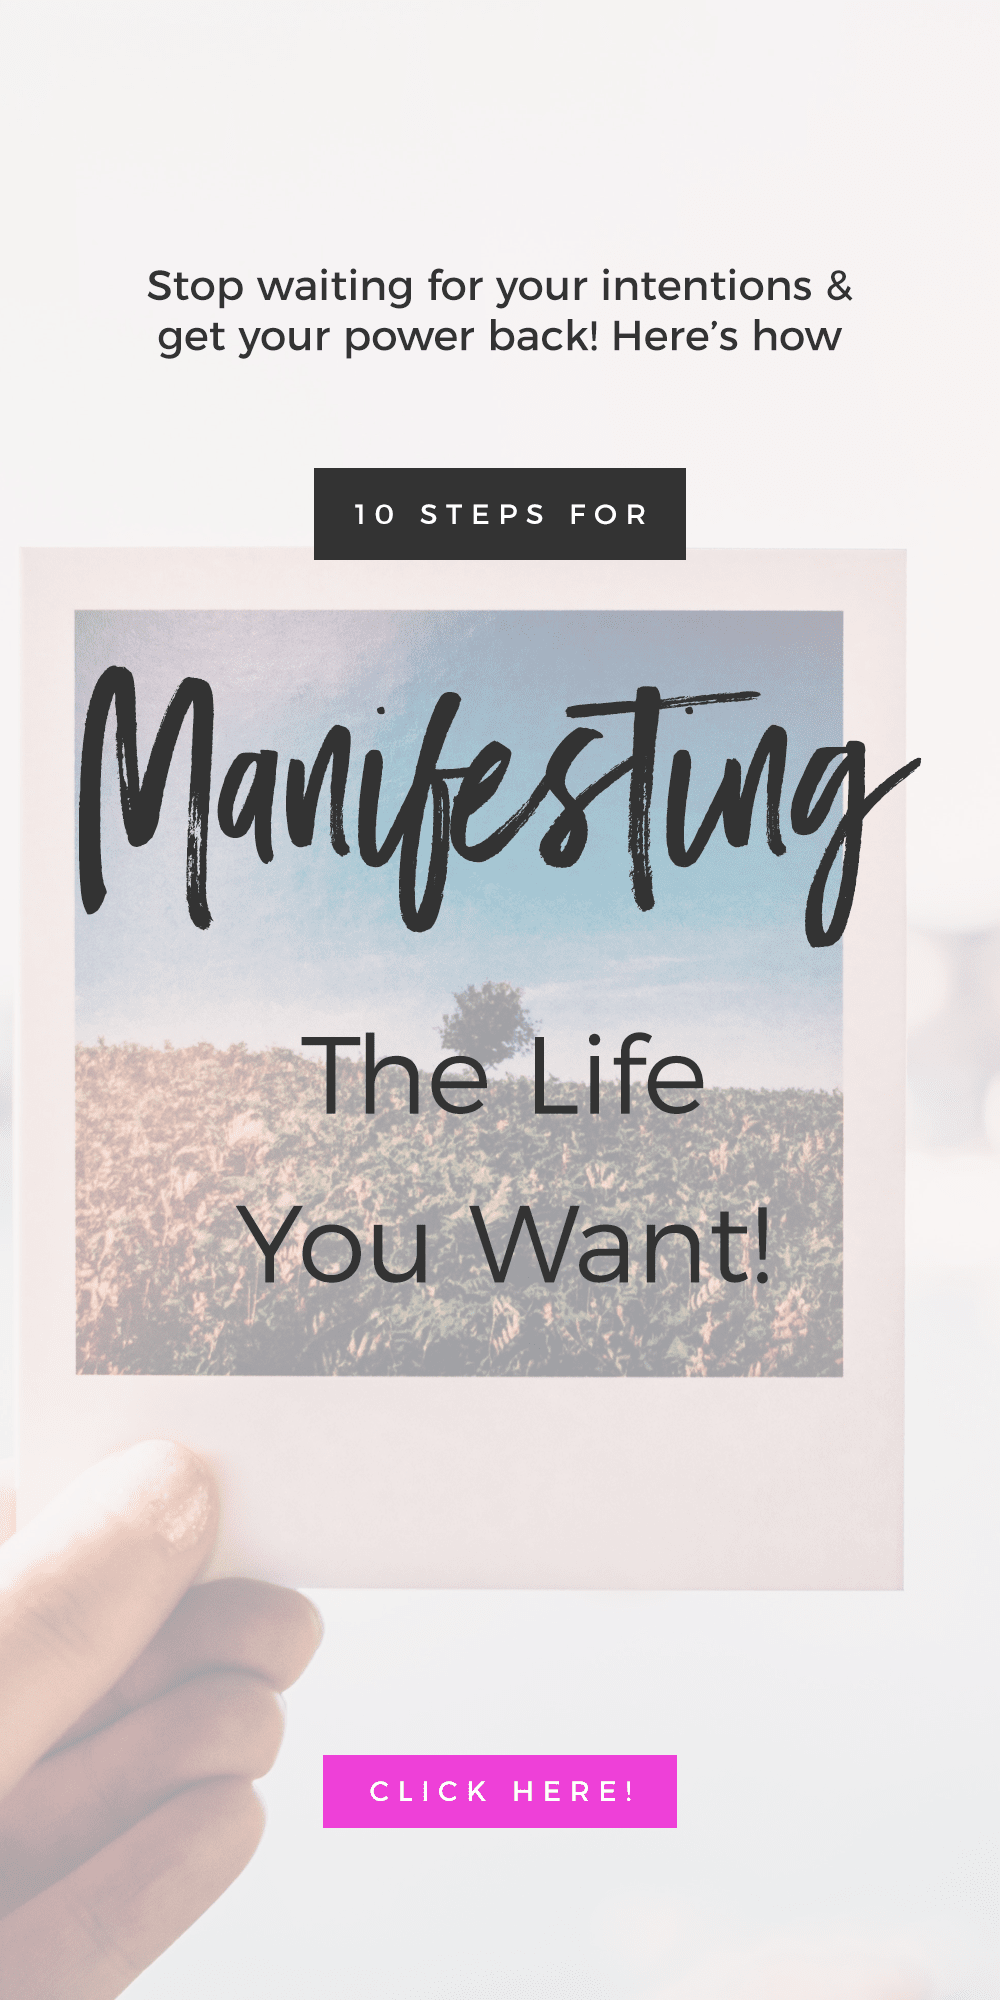 10 Tips For Manifesting The Life You Want!